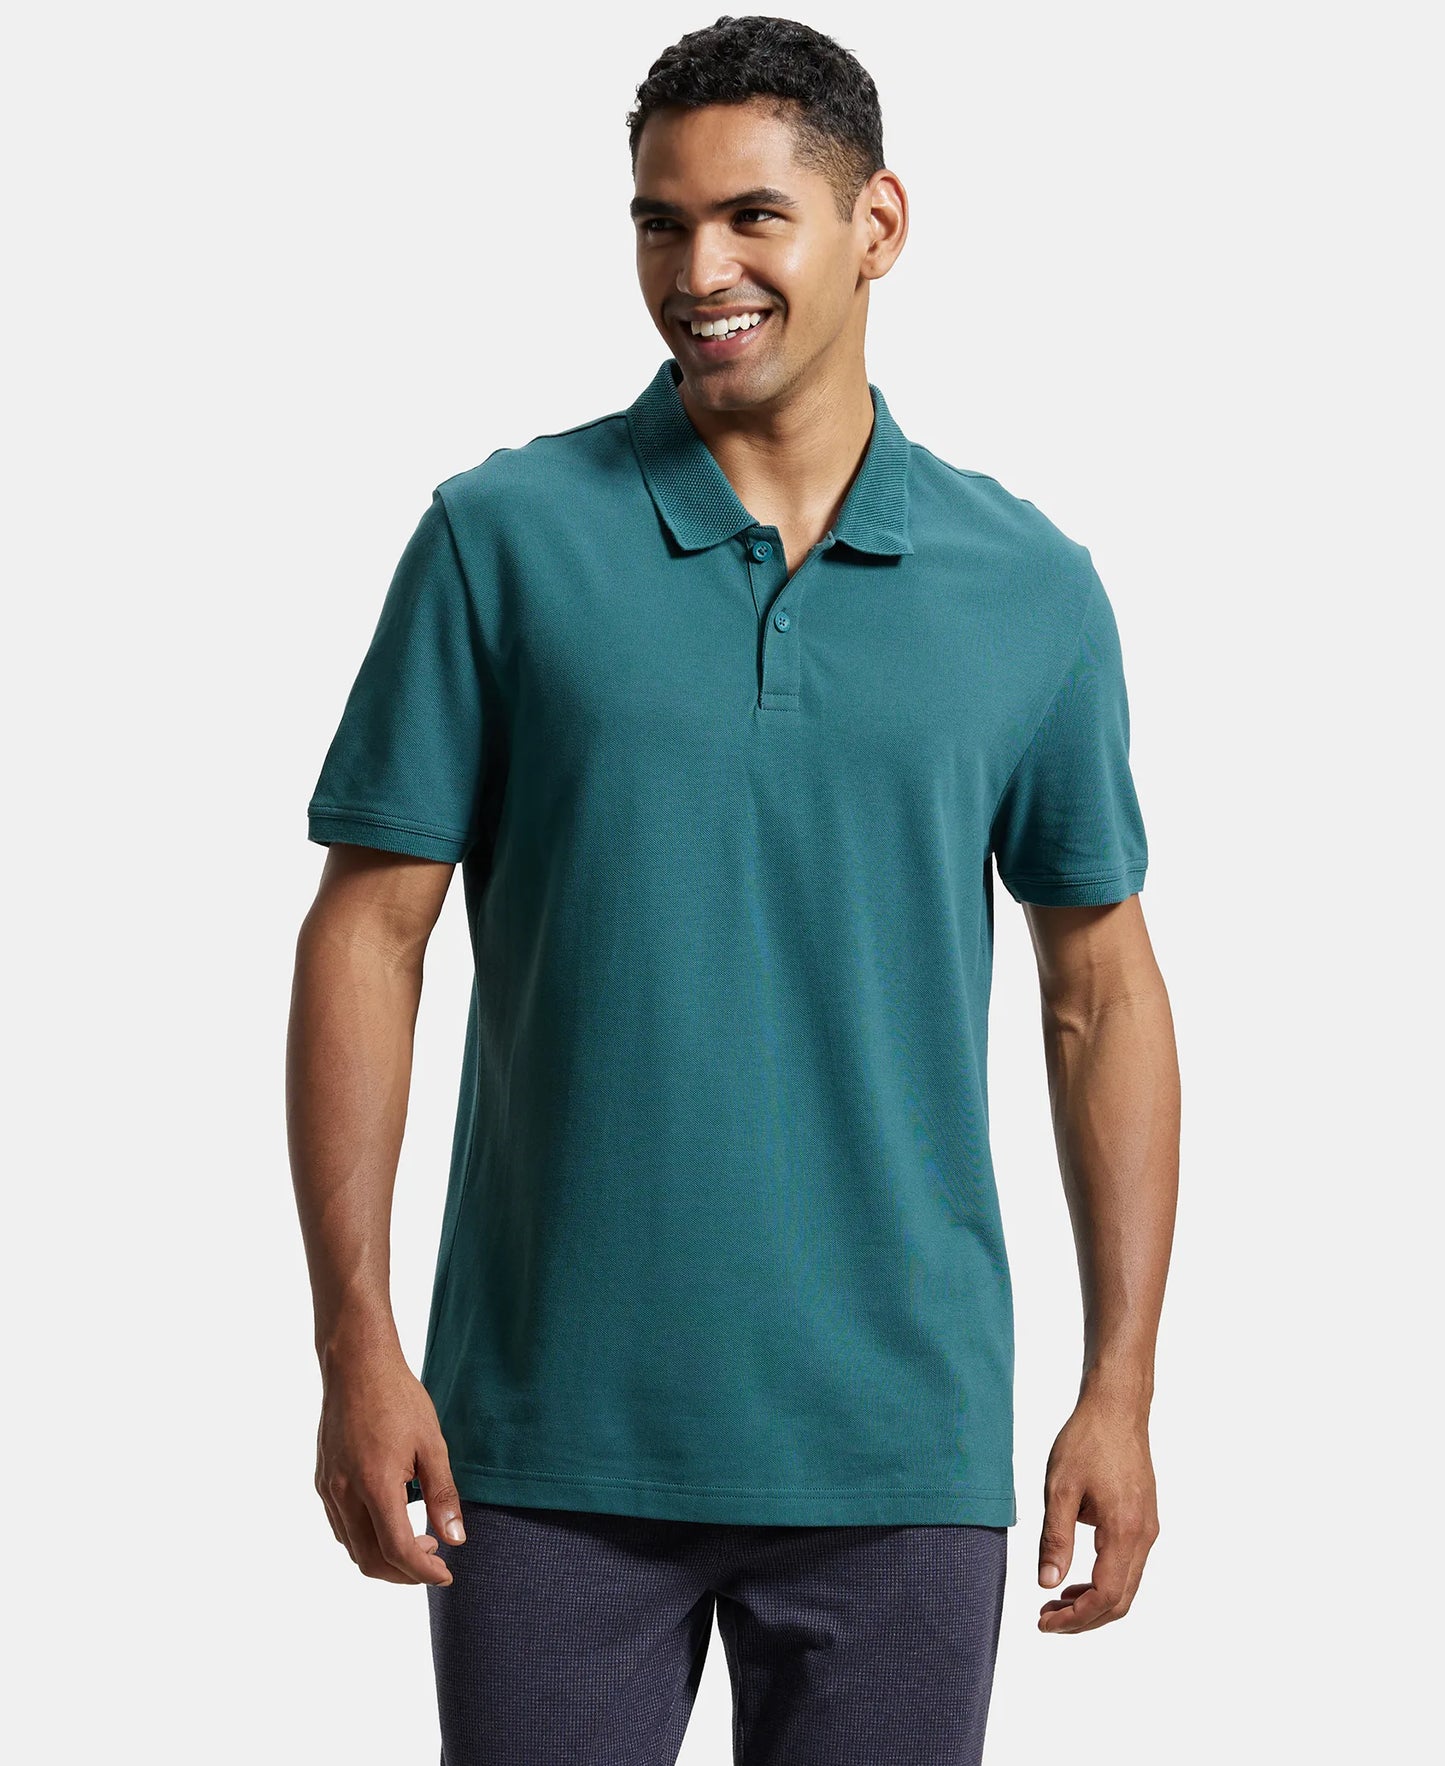 Super Combed Cotton Rich Pique Fabric Solid Half Sleeve Polo T-Shirt - Pacific Green-1